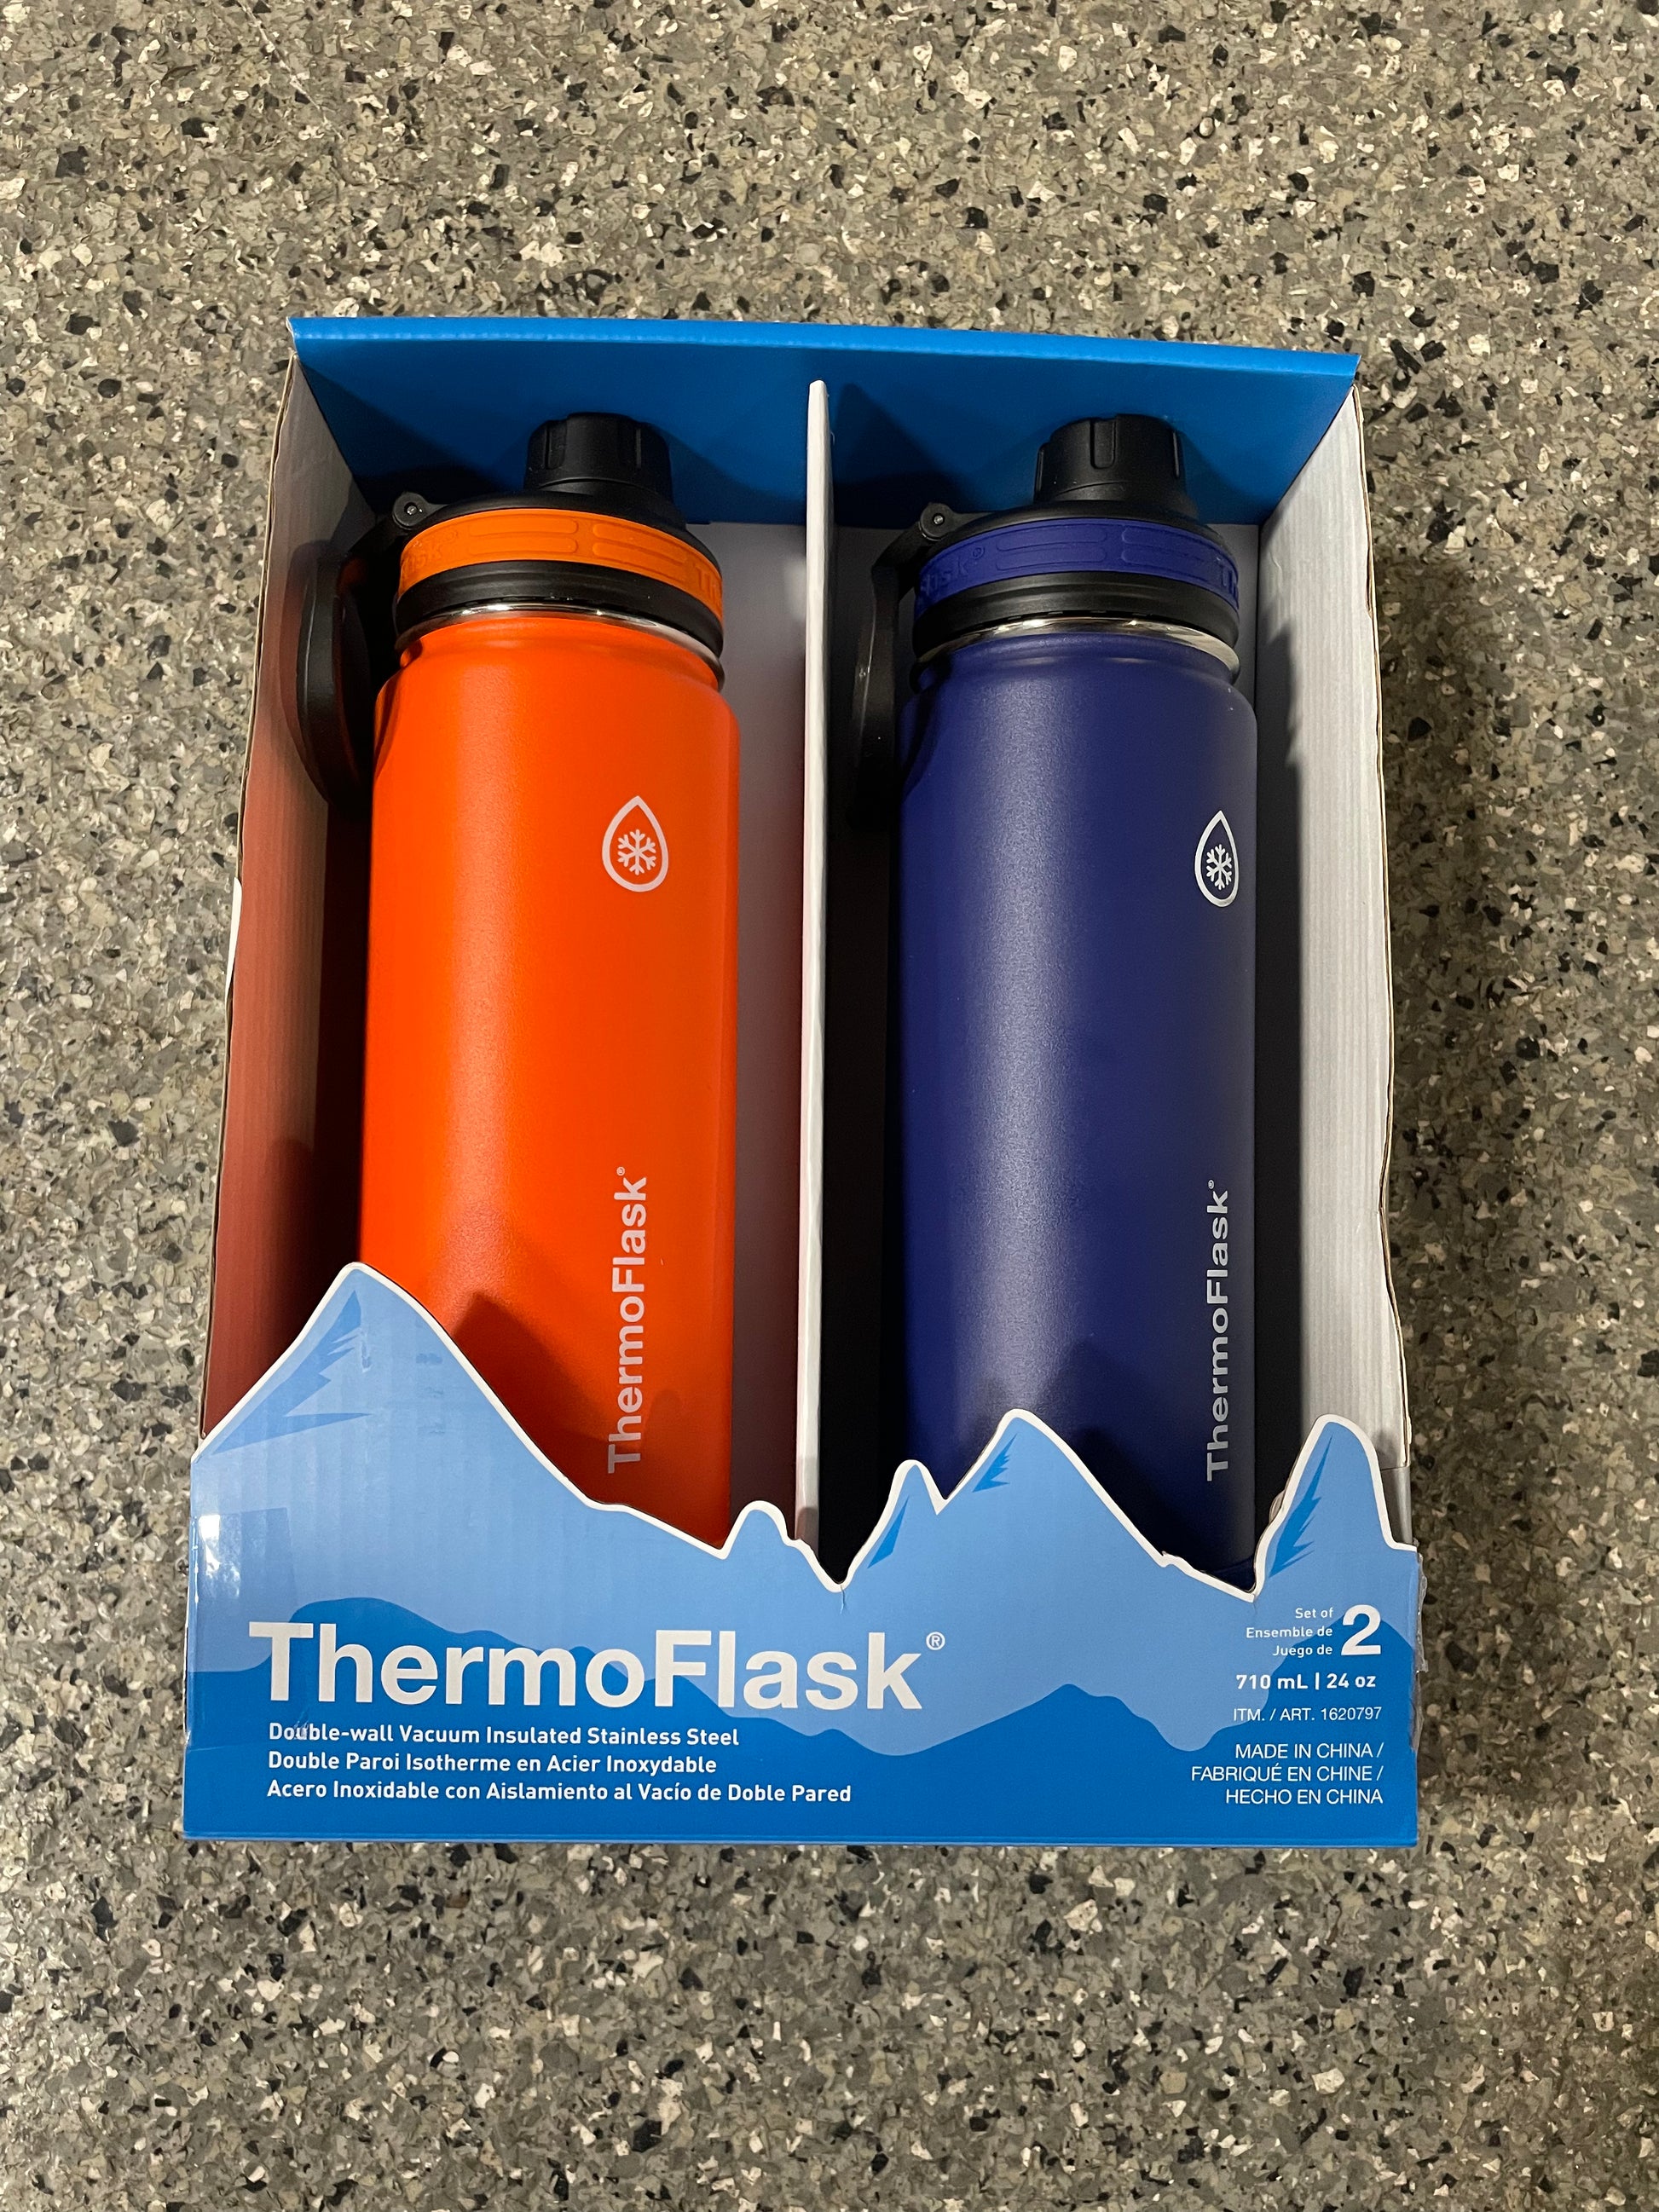 ThermoFlask 24oz Stainless Steel Insulated Water Bottles, 2-pack (Orange &  Blue)